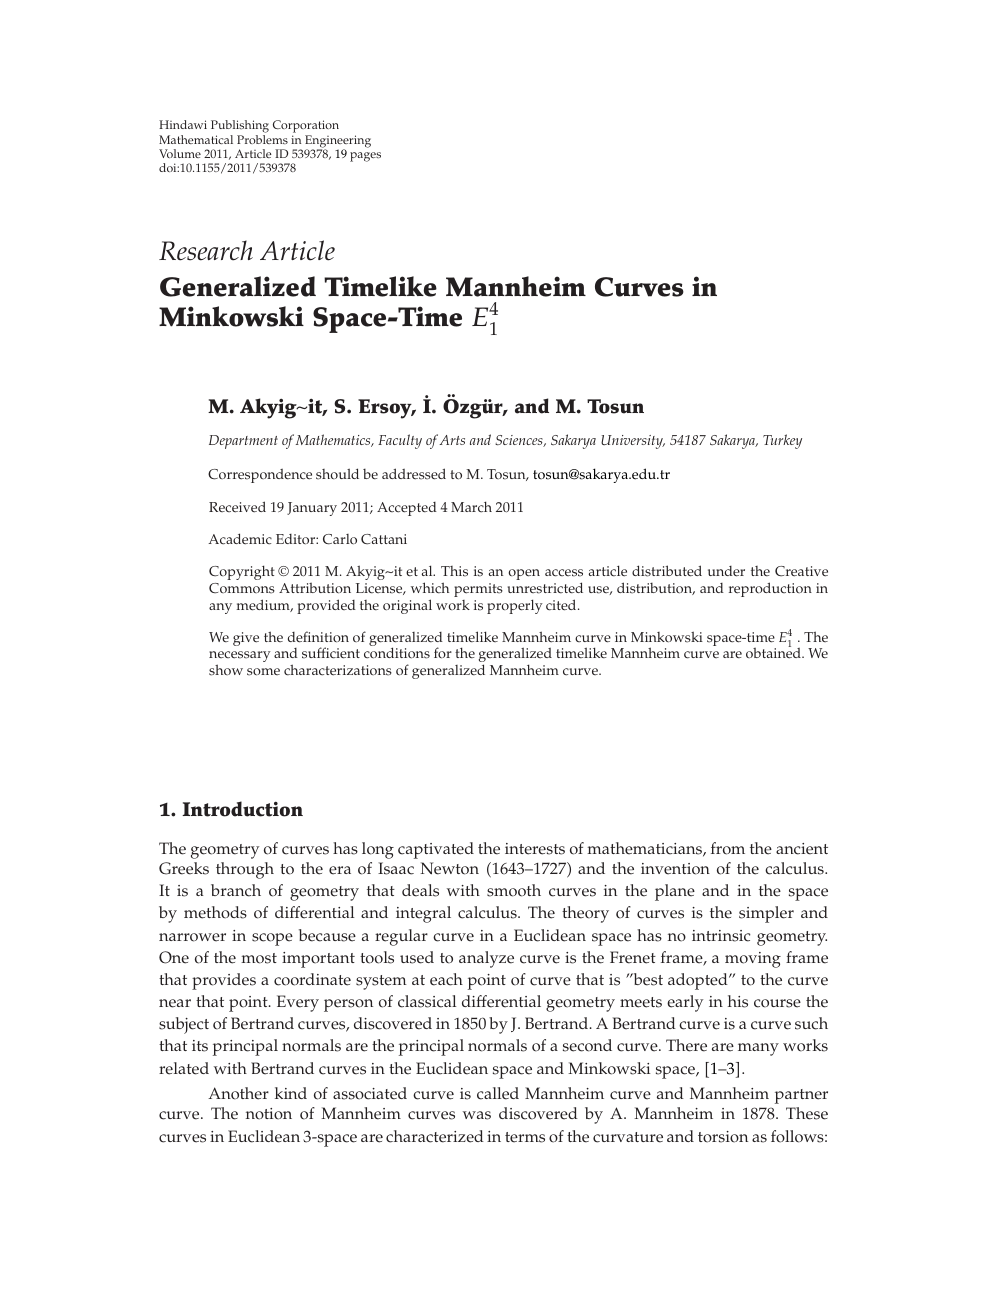 Generalized Timelike Mannheim Curves In Minkowski Space Time 𝐸𝟒𝟏 Topic Of Research Paper In Mathematics Download Scholarly Article Pdf And Read For Free On Cyberleninka Open Science Hub